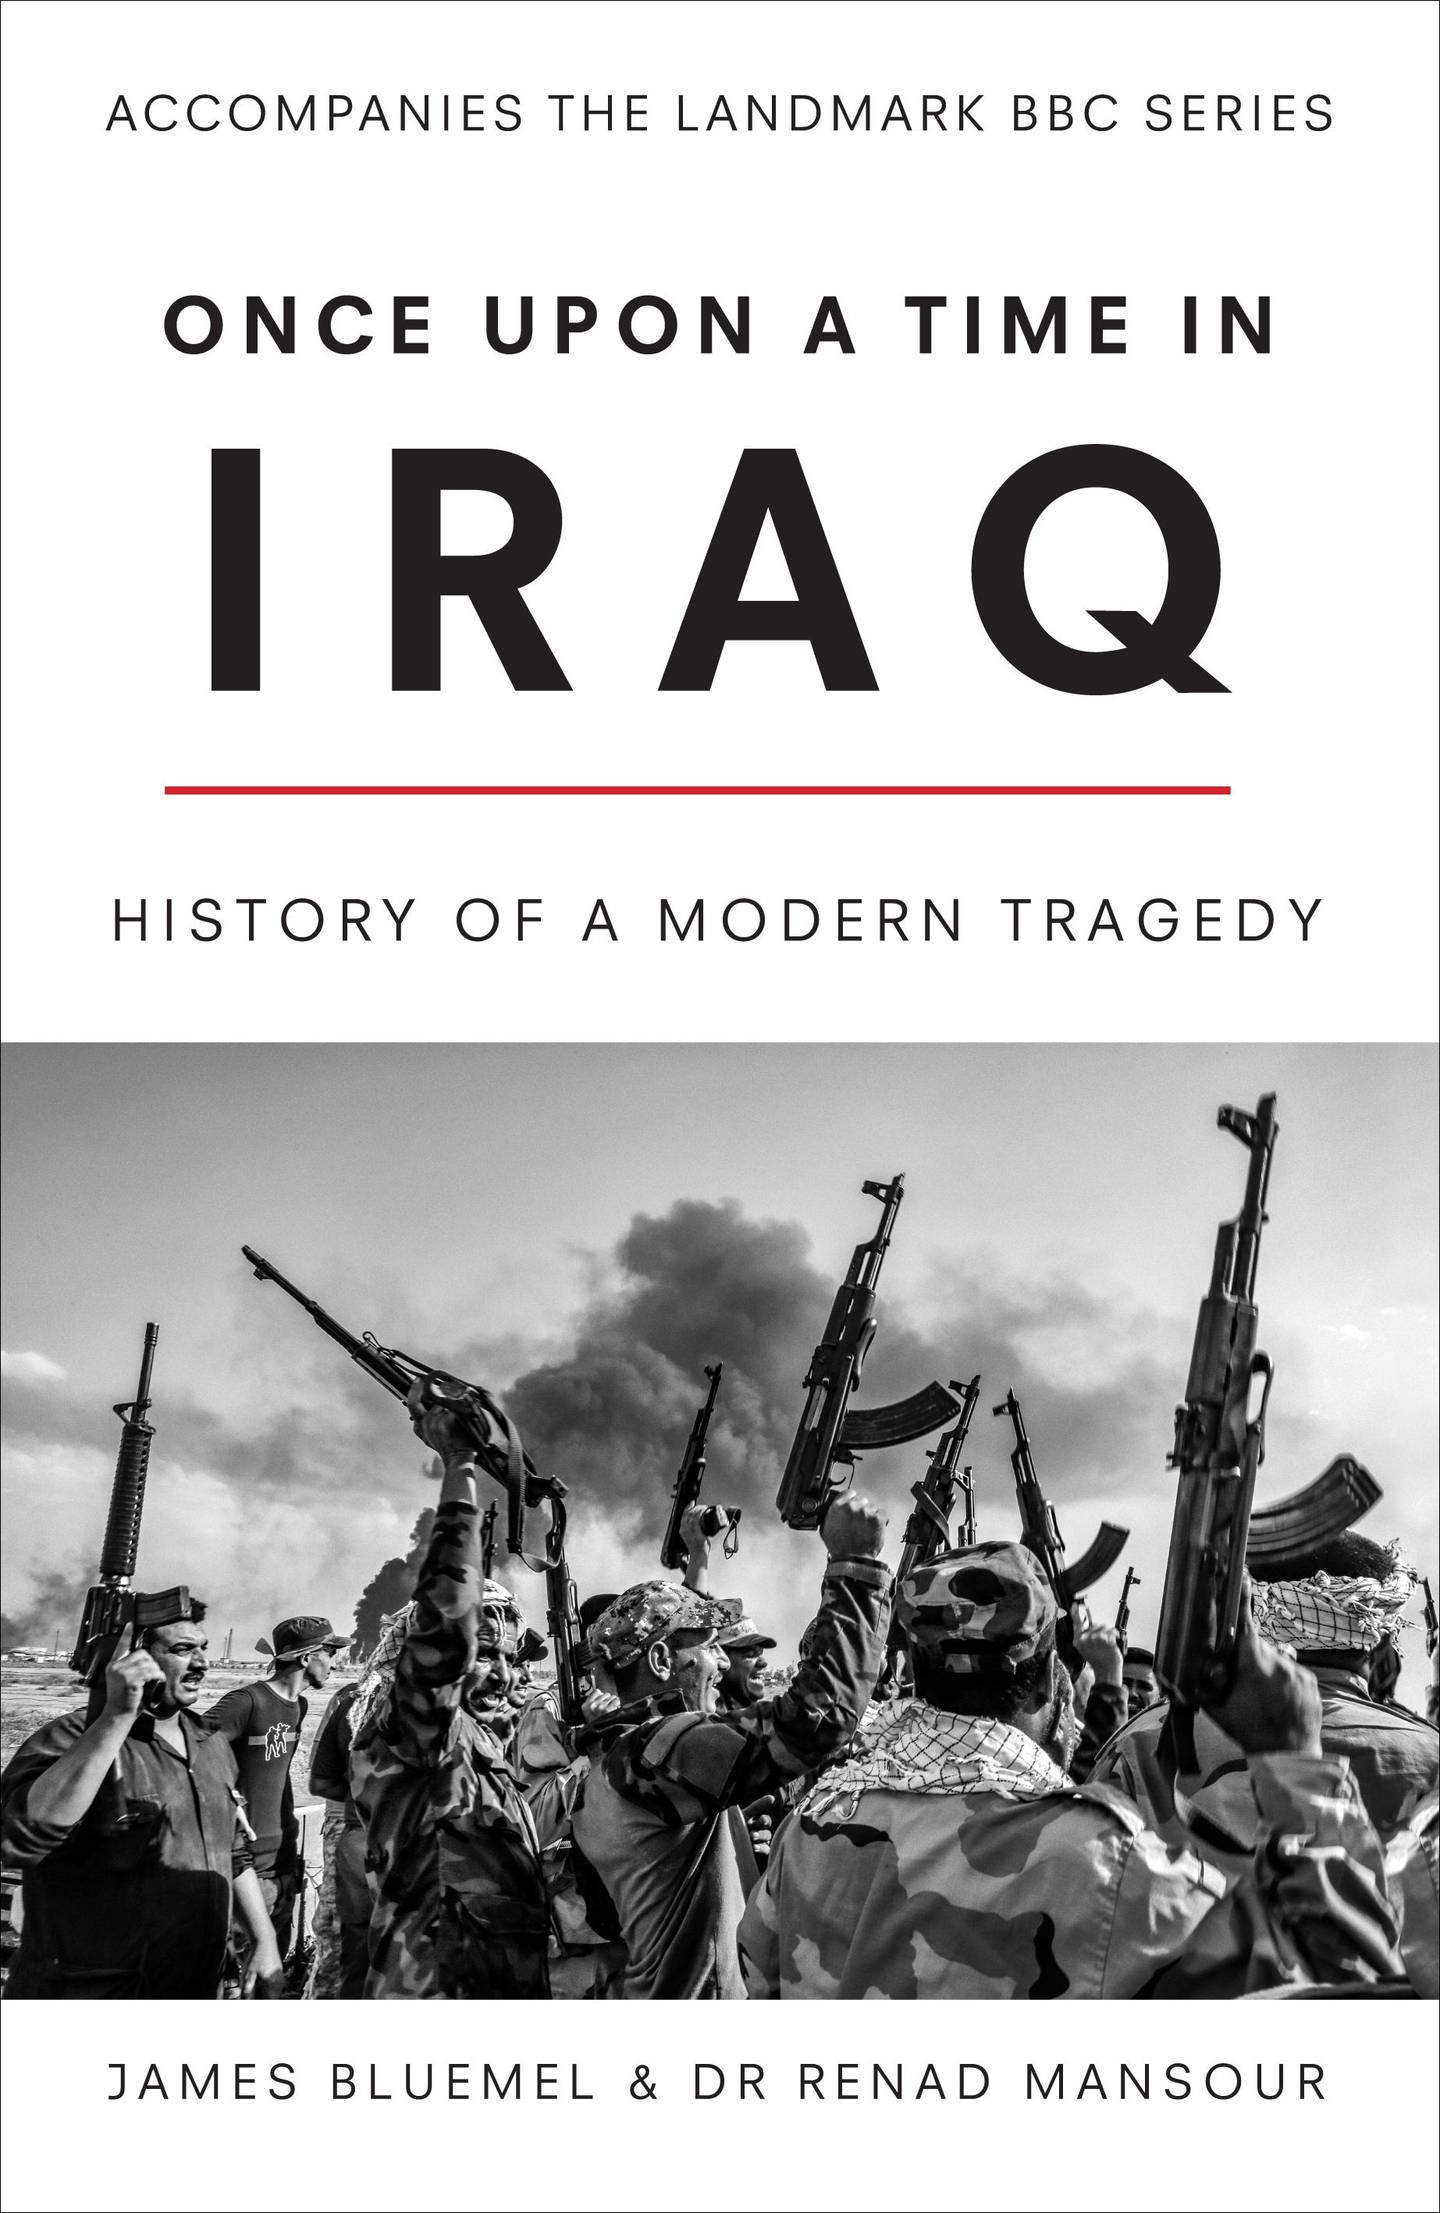 'Once Upon a Time in Iraq' book jacket 